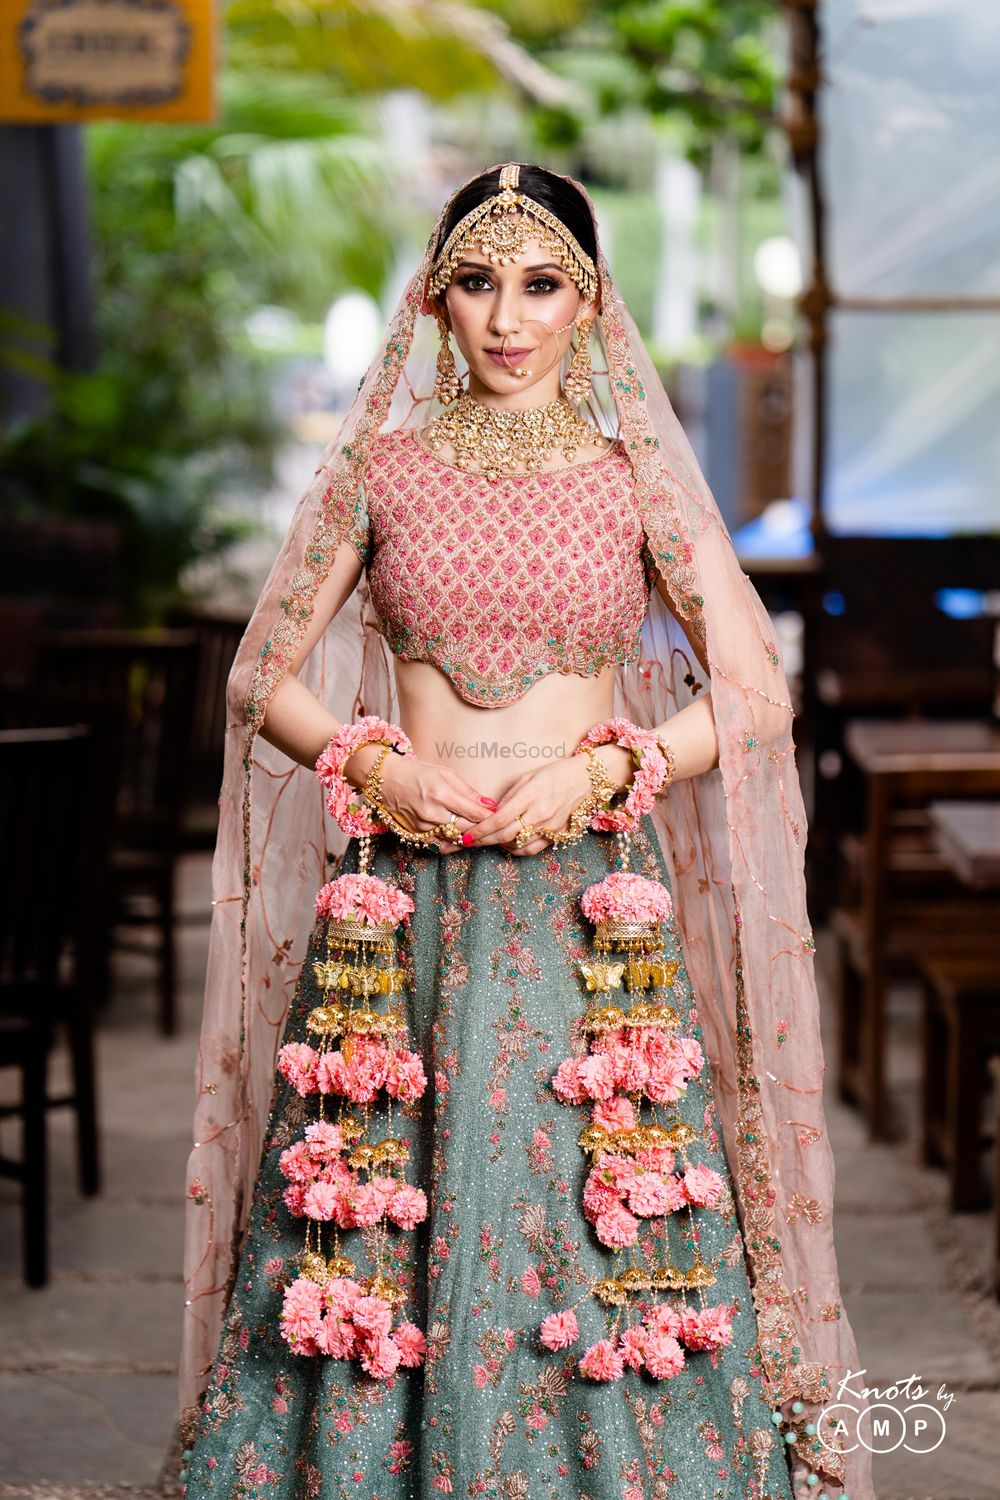 Photo of A beautiful bride in a stunning outfit and off-beat floral kaleere and gold jewellery.